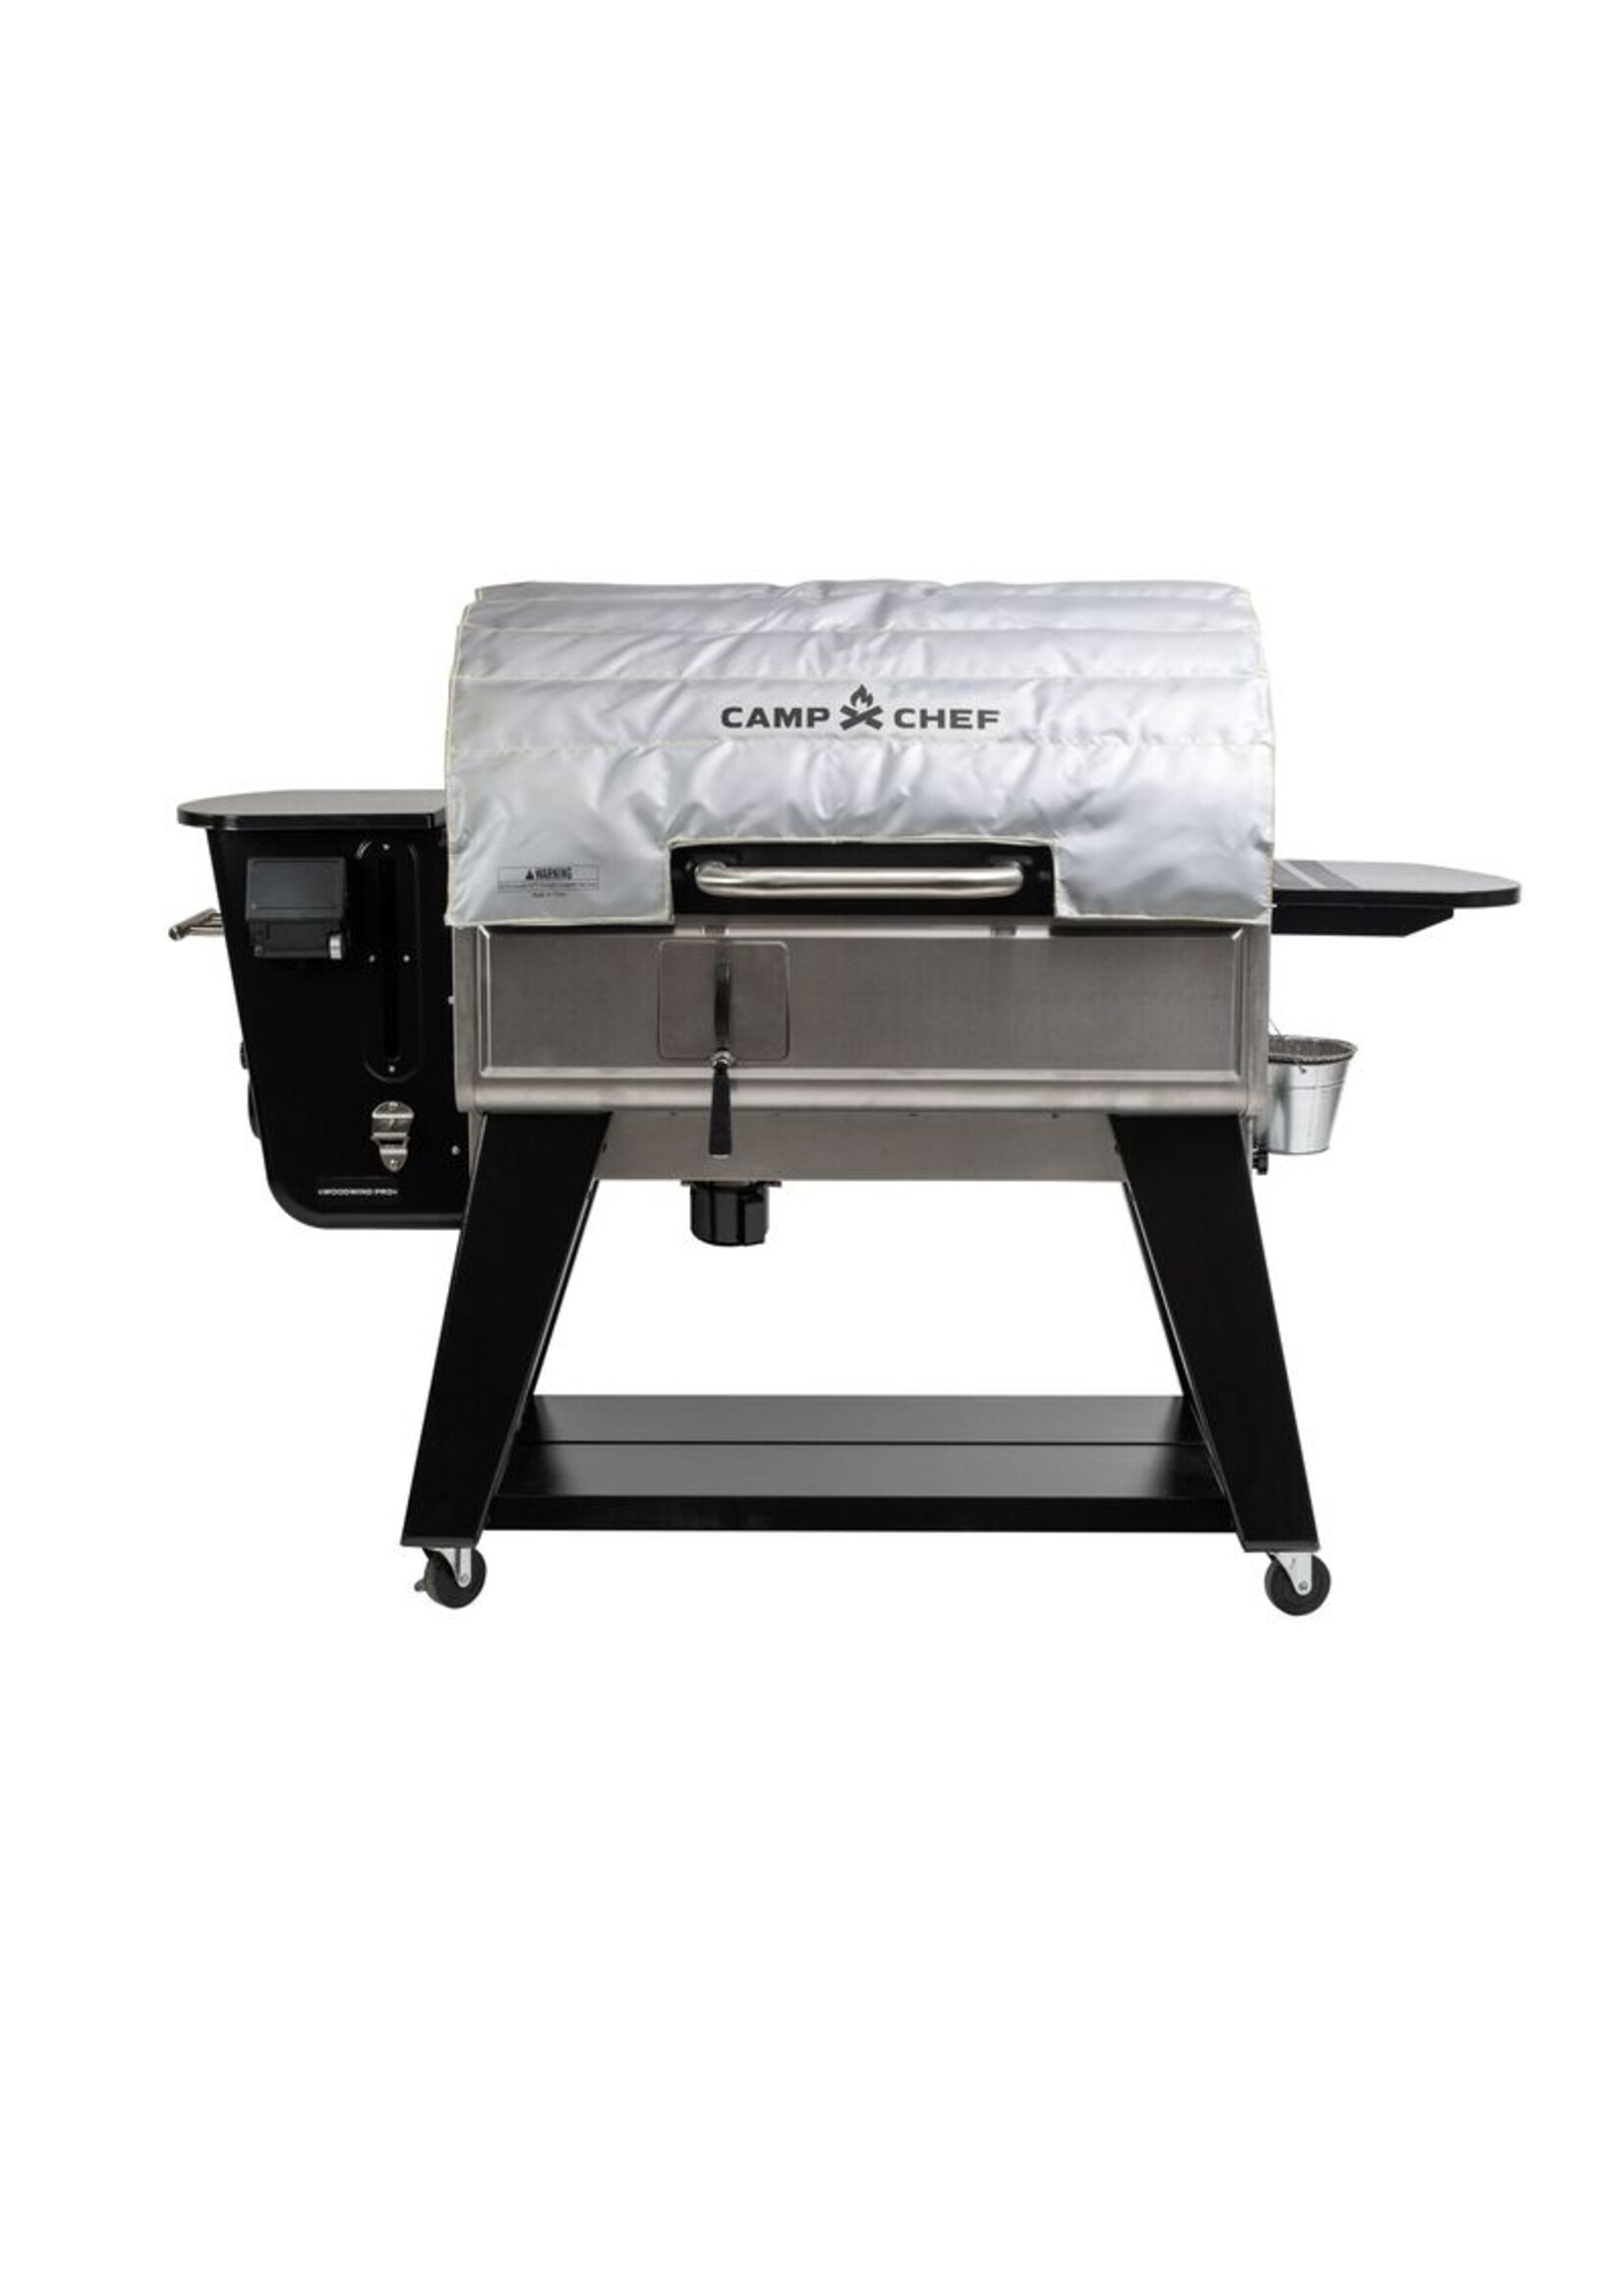 Camp Chef Camp Chef 36" Pro Blanket